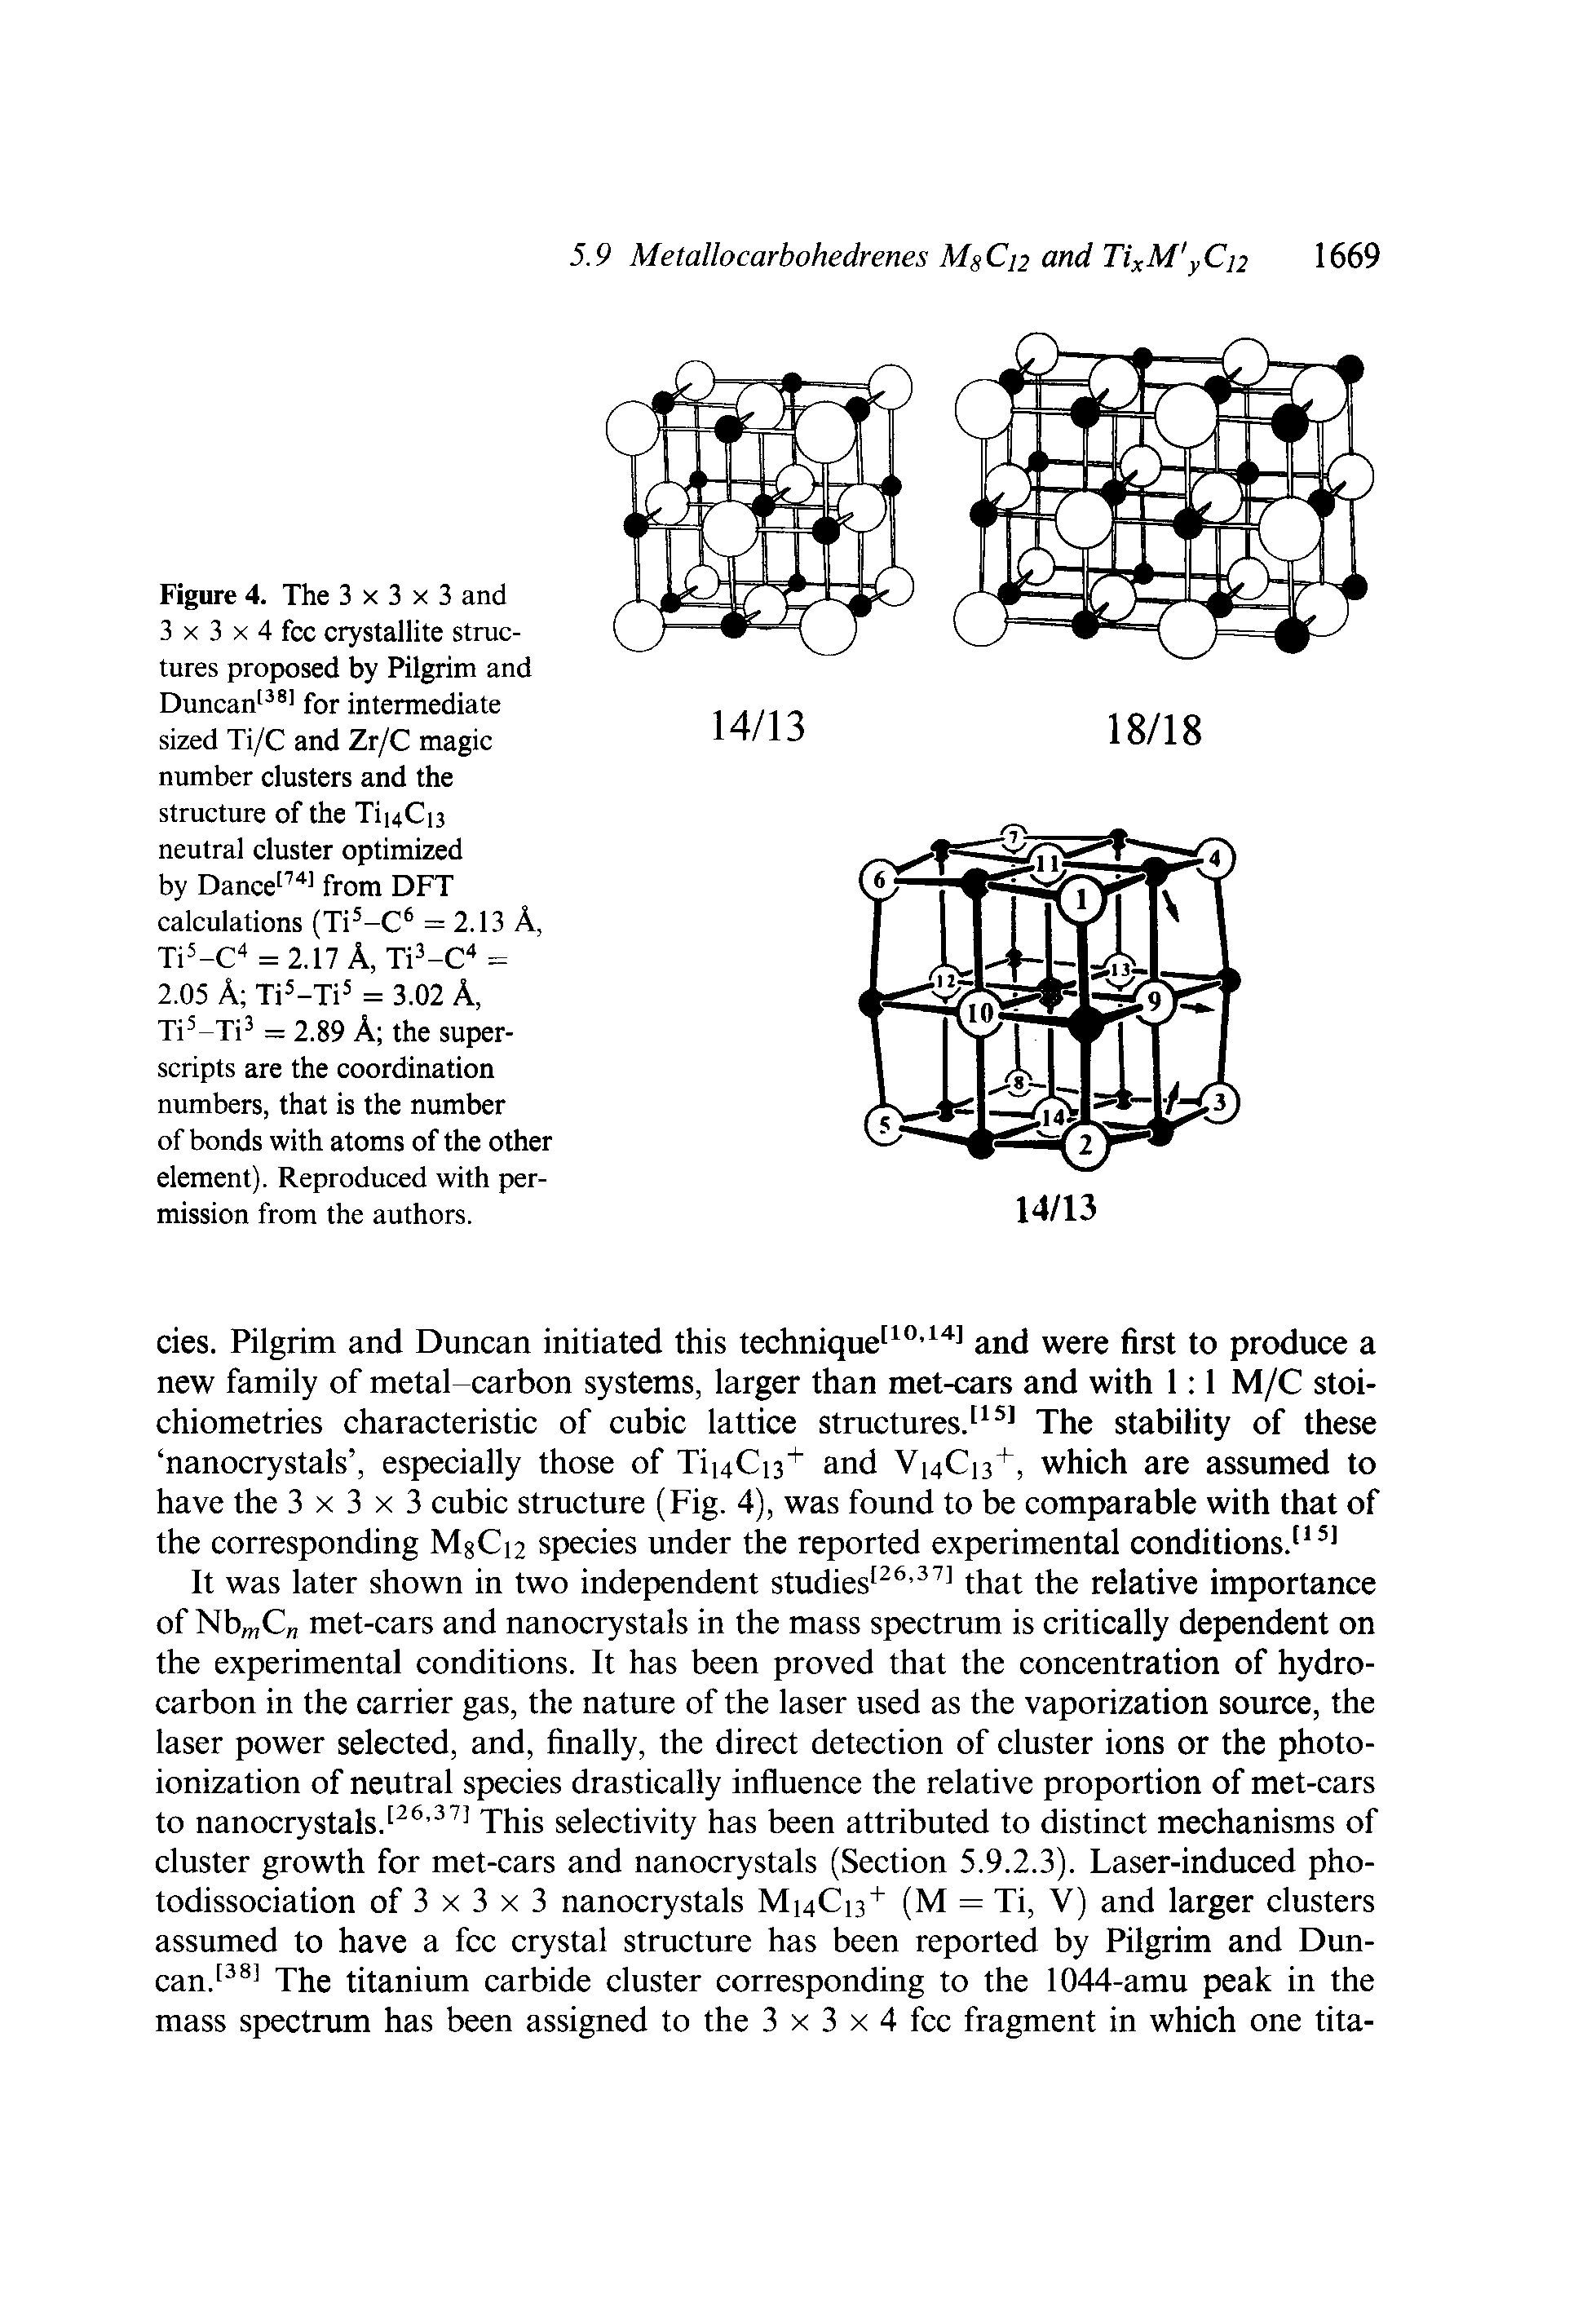 Figure 4. The 3x3x3 and 3 X 3 X 4 fee erystallite structures proposed by Pilgrim and Duncan for intermediate sized Ti/C and Zr/C magic number clusters and the structure of the Tii4Ci3 neutral cluster optimized by Dance from DFT calculations (Ti -C = 2.13 A, Ti5-C = 2.17 A, 713-0 = 2.05 A Ti -Ti = 3.02 A, Ti3-Ti3 = 2.89 A the superscripts are the coordination numbers, that is the number of bonds with atoms of the other element). Reproduced with permission from the authors.